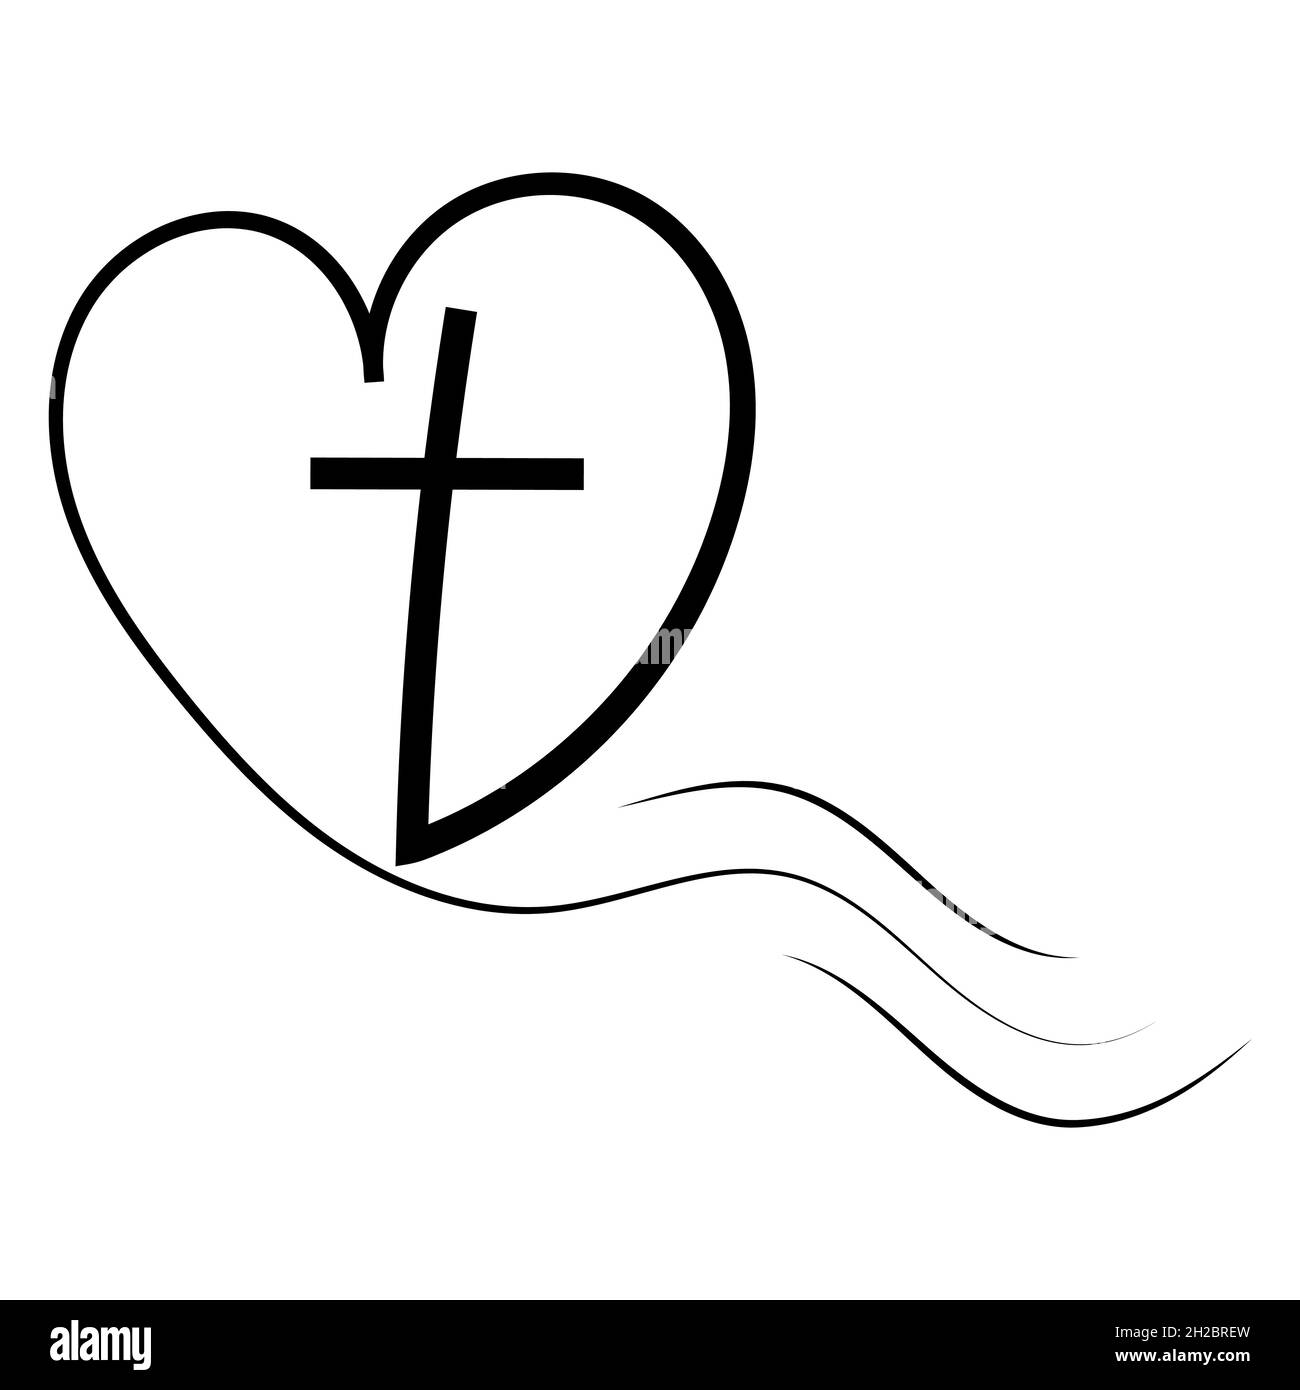 Logo template for churches love for God cross in heart. Religious calligraphy cross and heart stock illustration Stock Vector